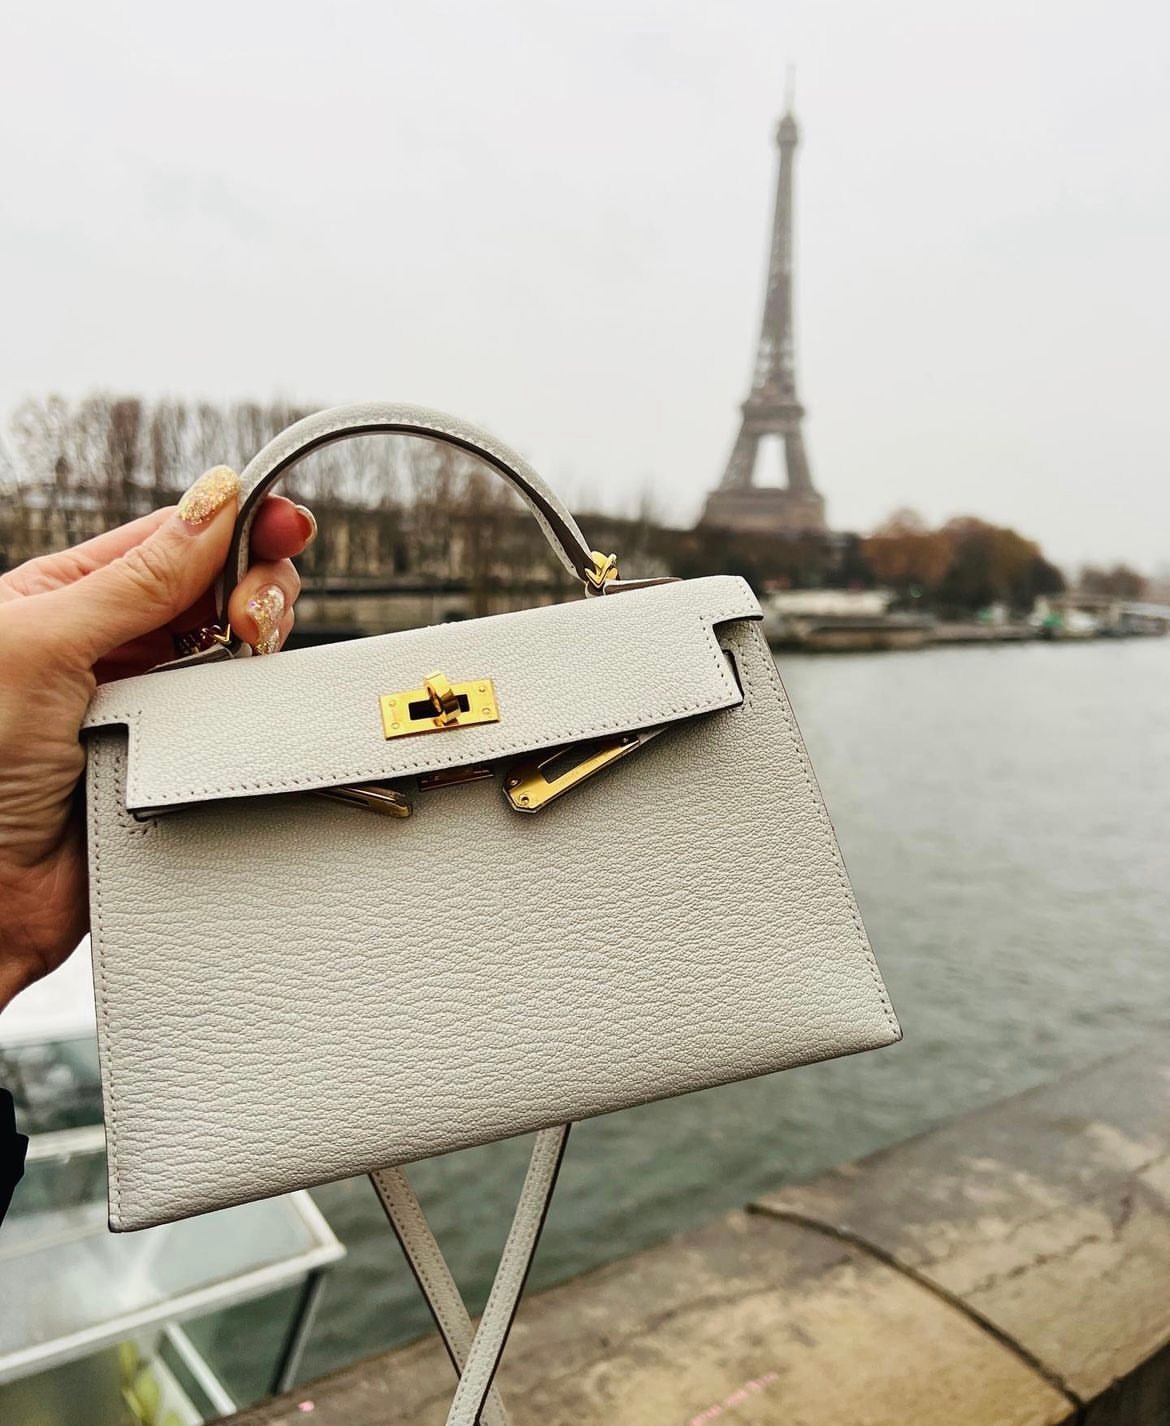 Are These Hermès Bags Better Than The Birkin? The Roulis & More